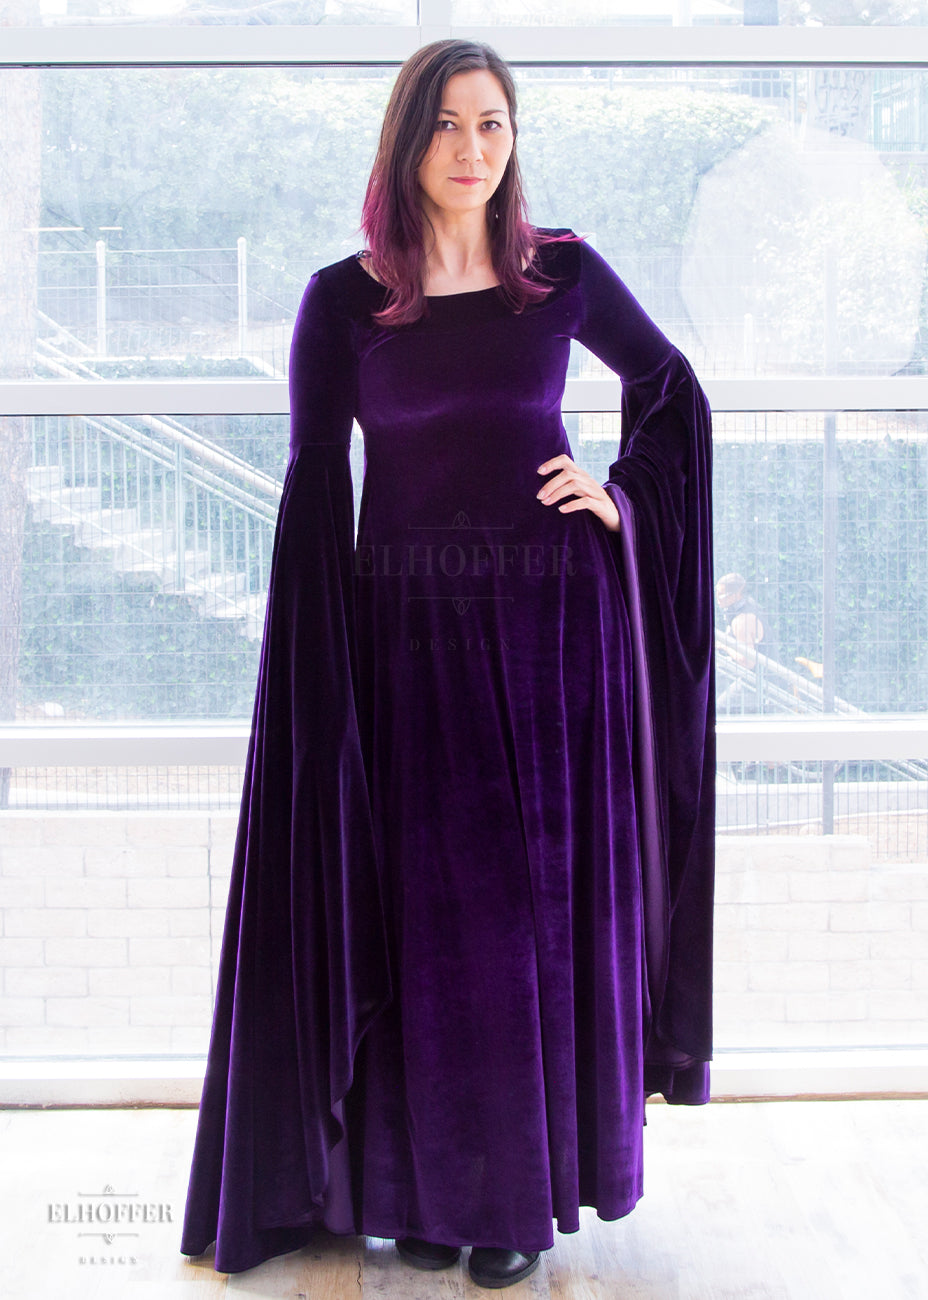 Susan (a medium fair size extra small model with dark hair with a purple ombre) wears the purple velvet floor length dress. It has a boatneck neckline and extra long flowing sleeves that fall to ankle length.